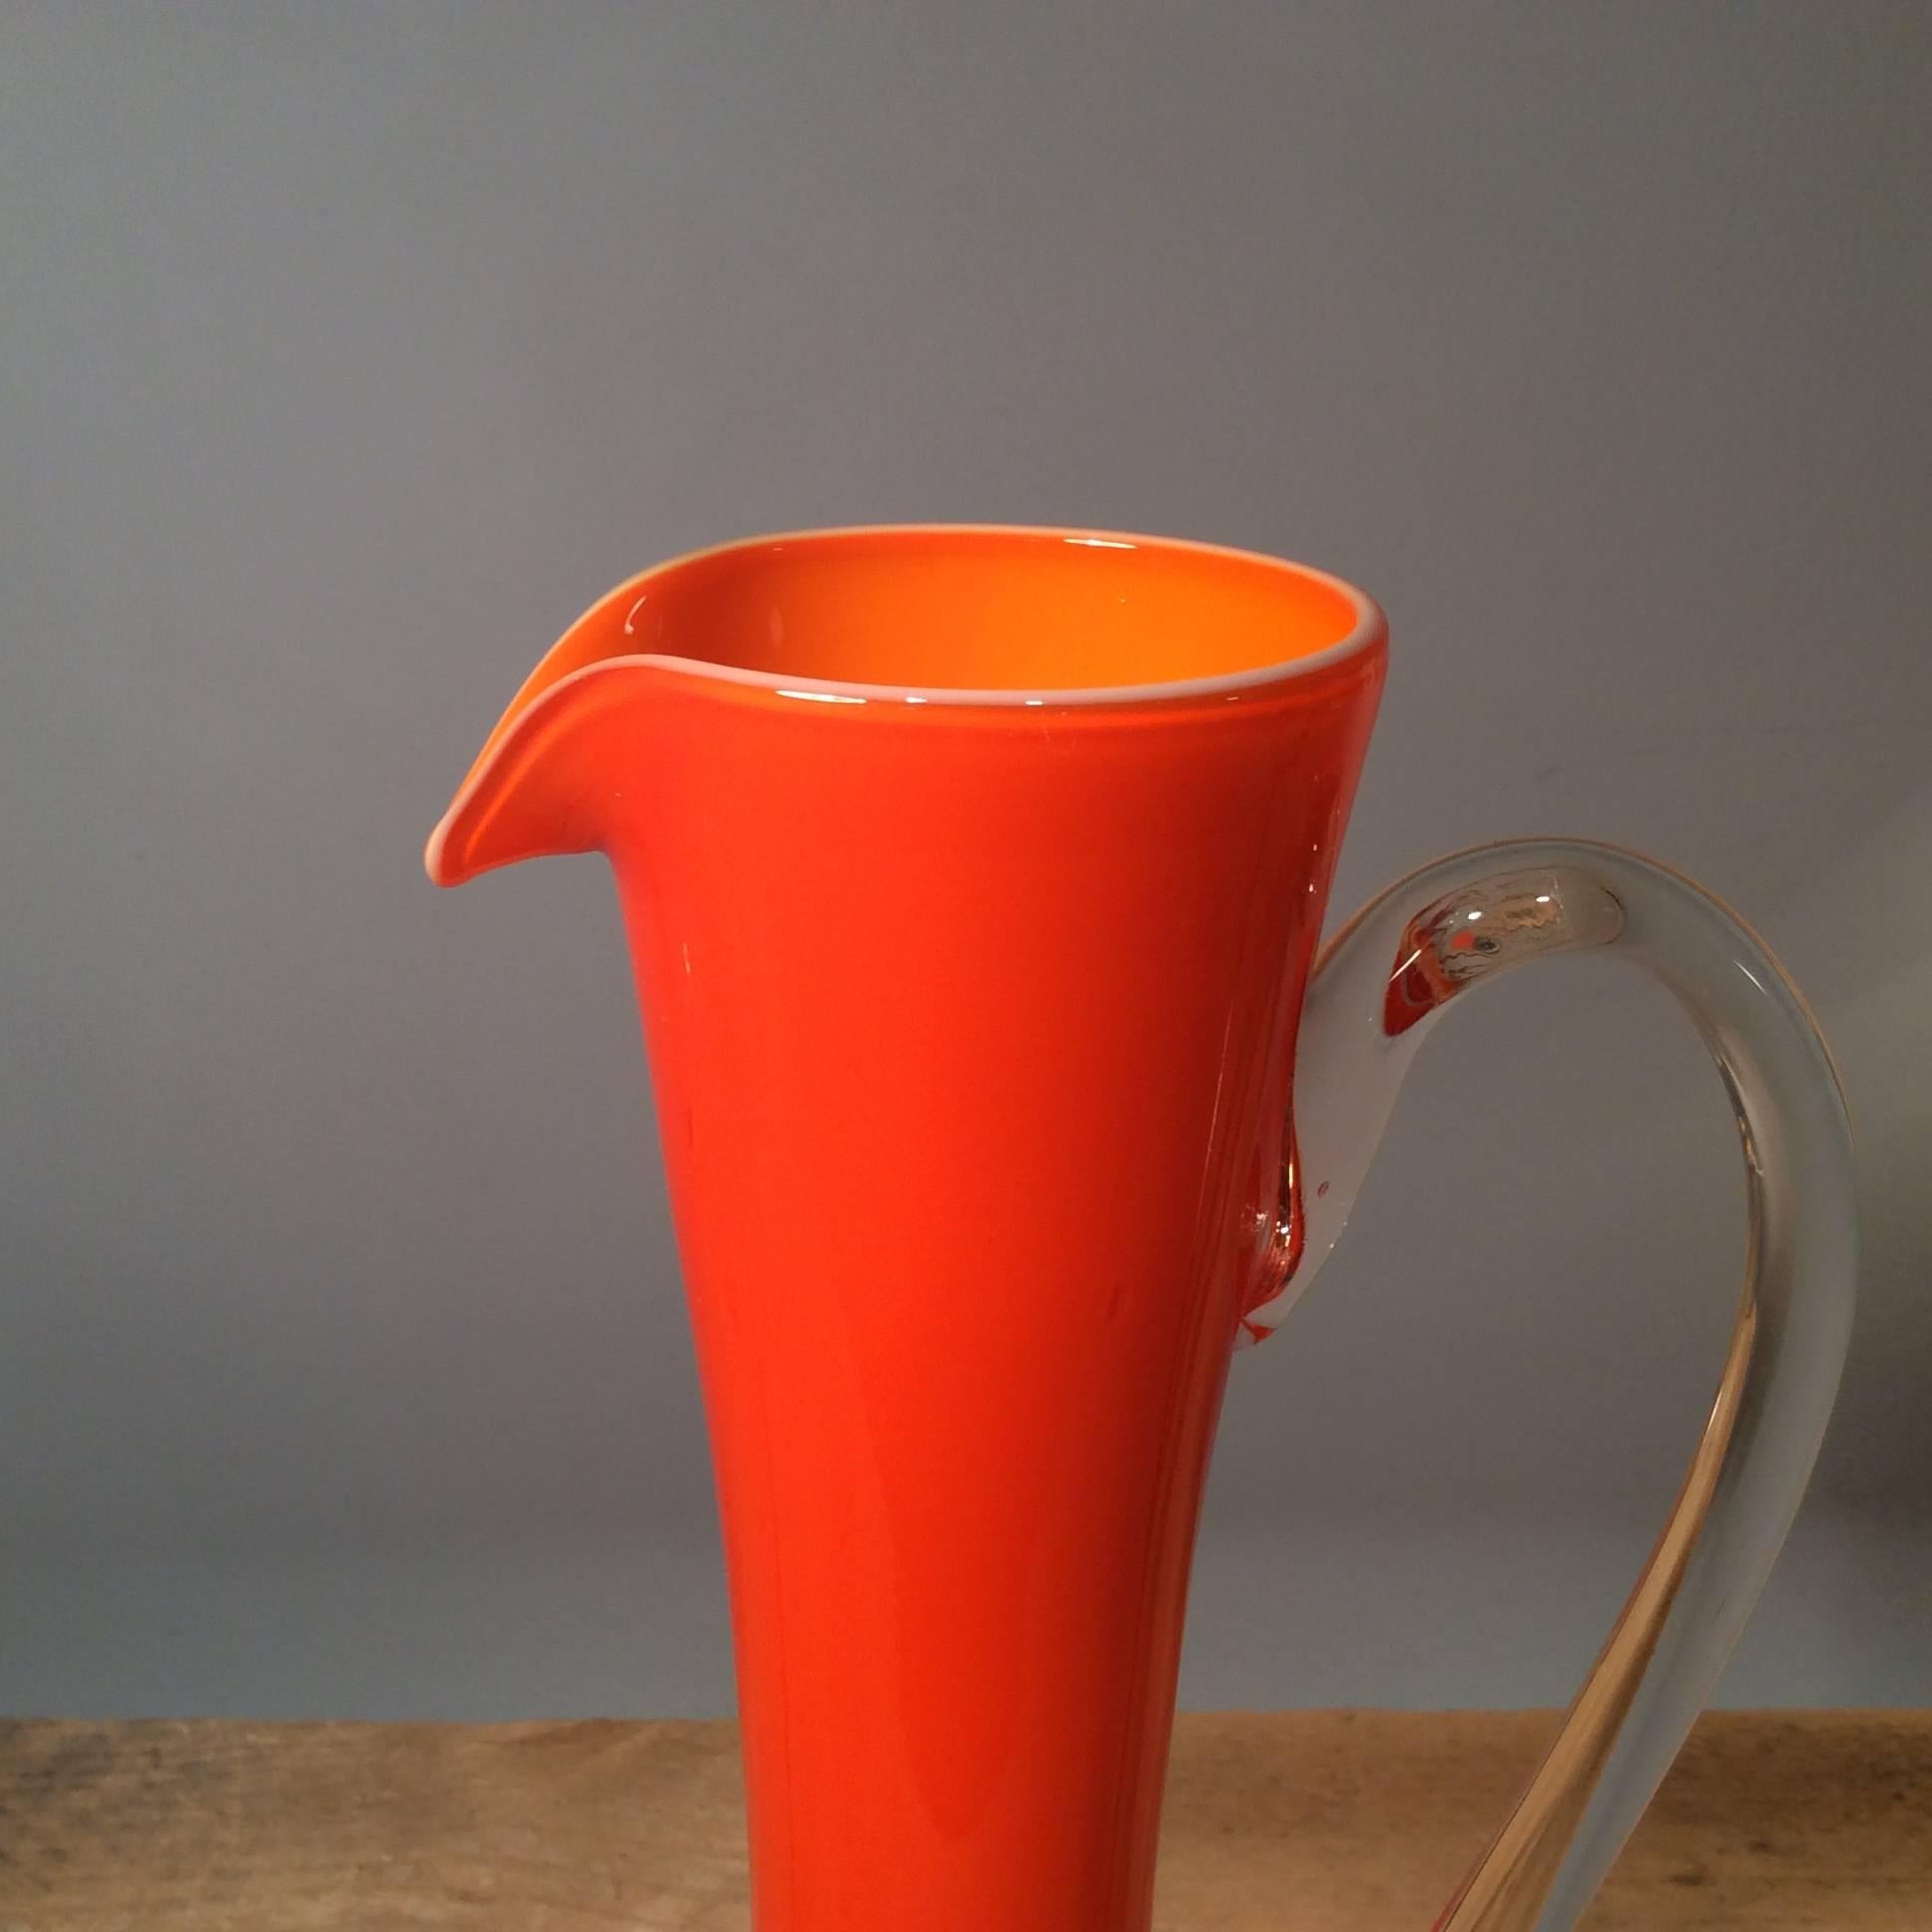 This brilliant orange retro glass jug will make any room pop with it's groovy shape and contrasting clear glass handle, 1970s.

Dimensions: Height 31 cm, diameter 17 cm.